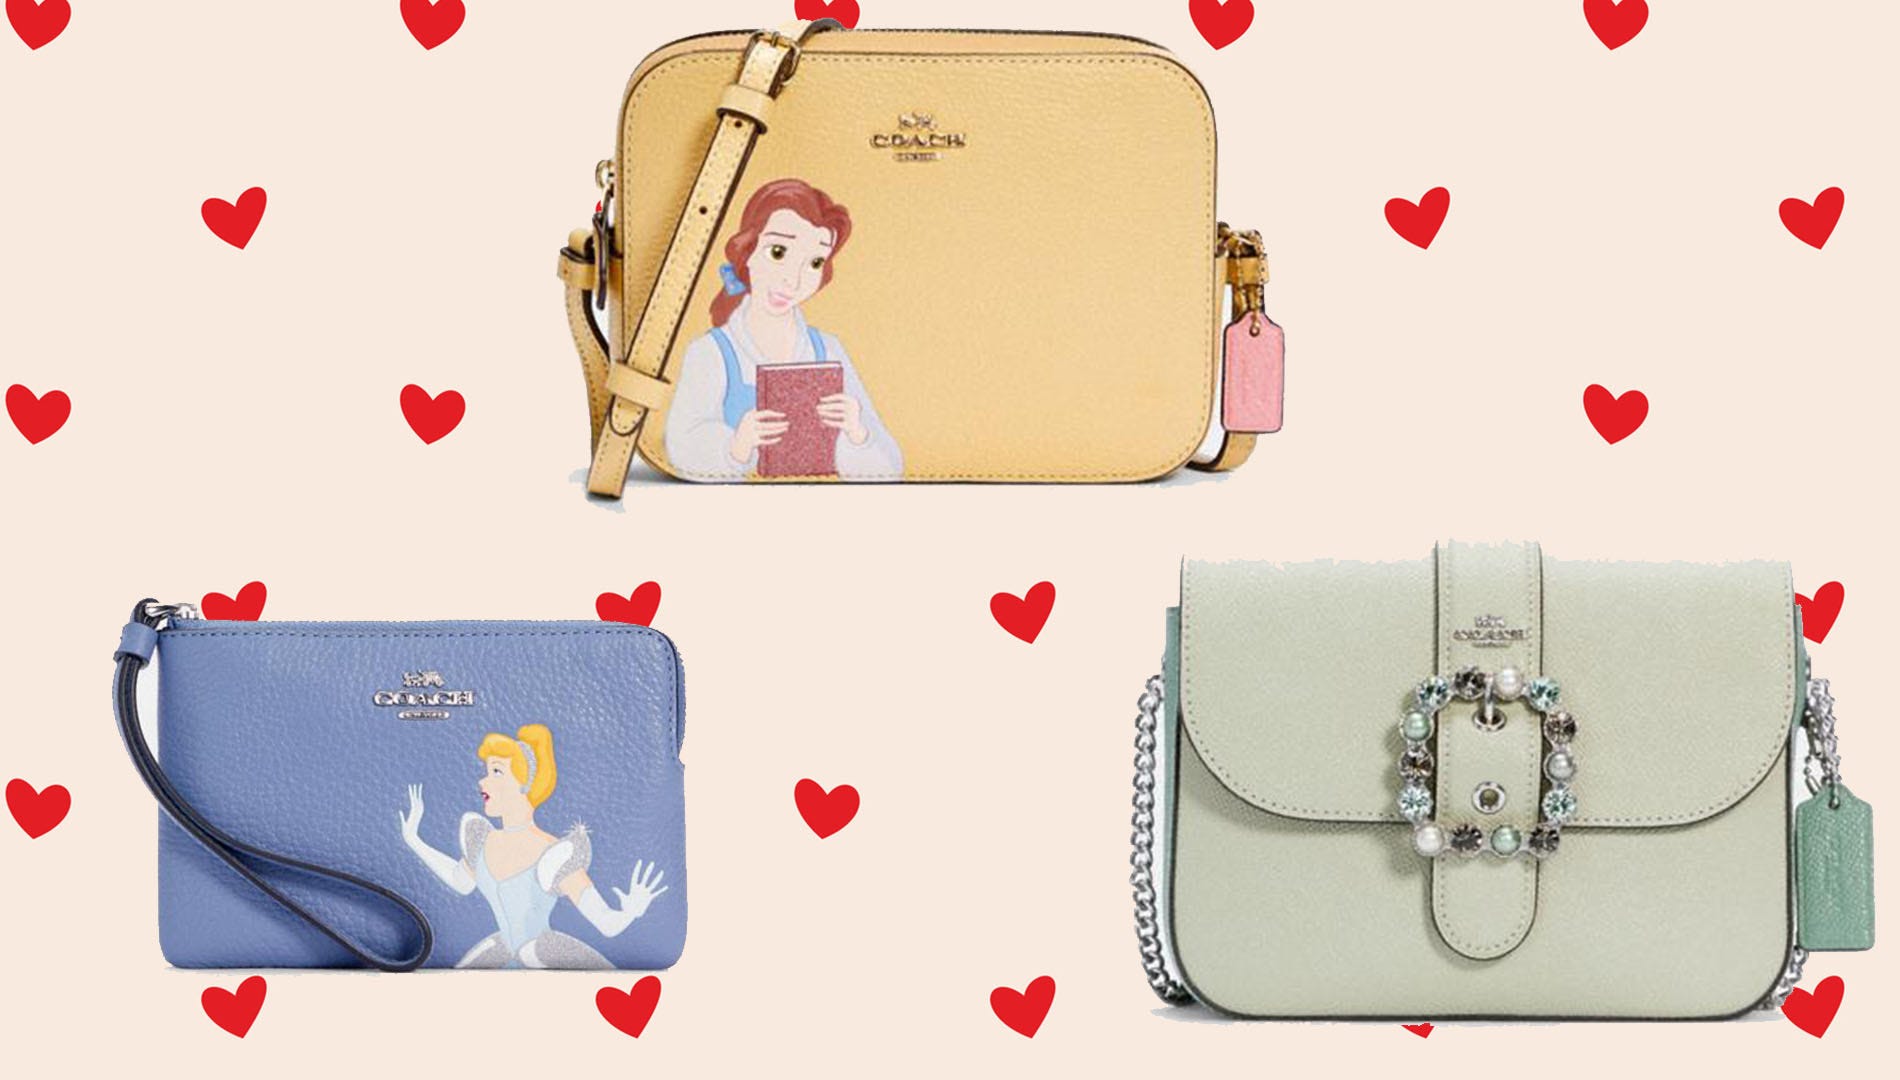 Coach Outlet: Take 50% off the new Coach x Disney princess collection